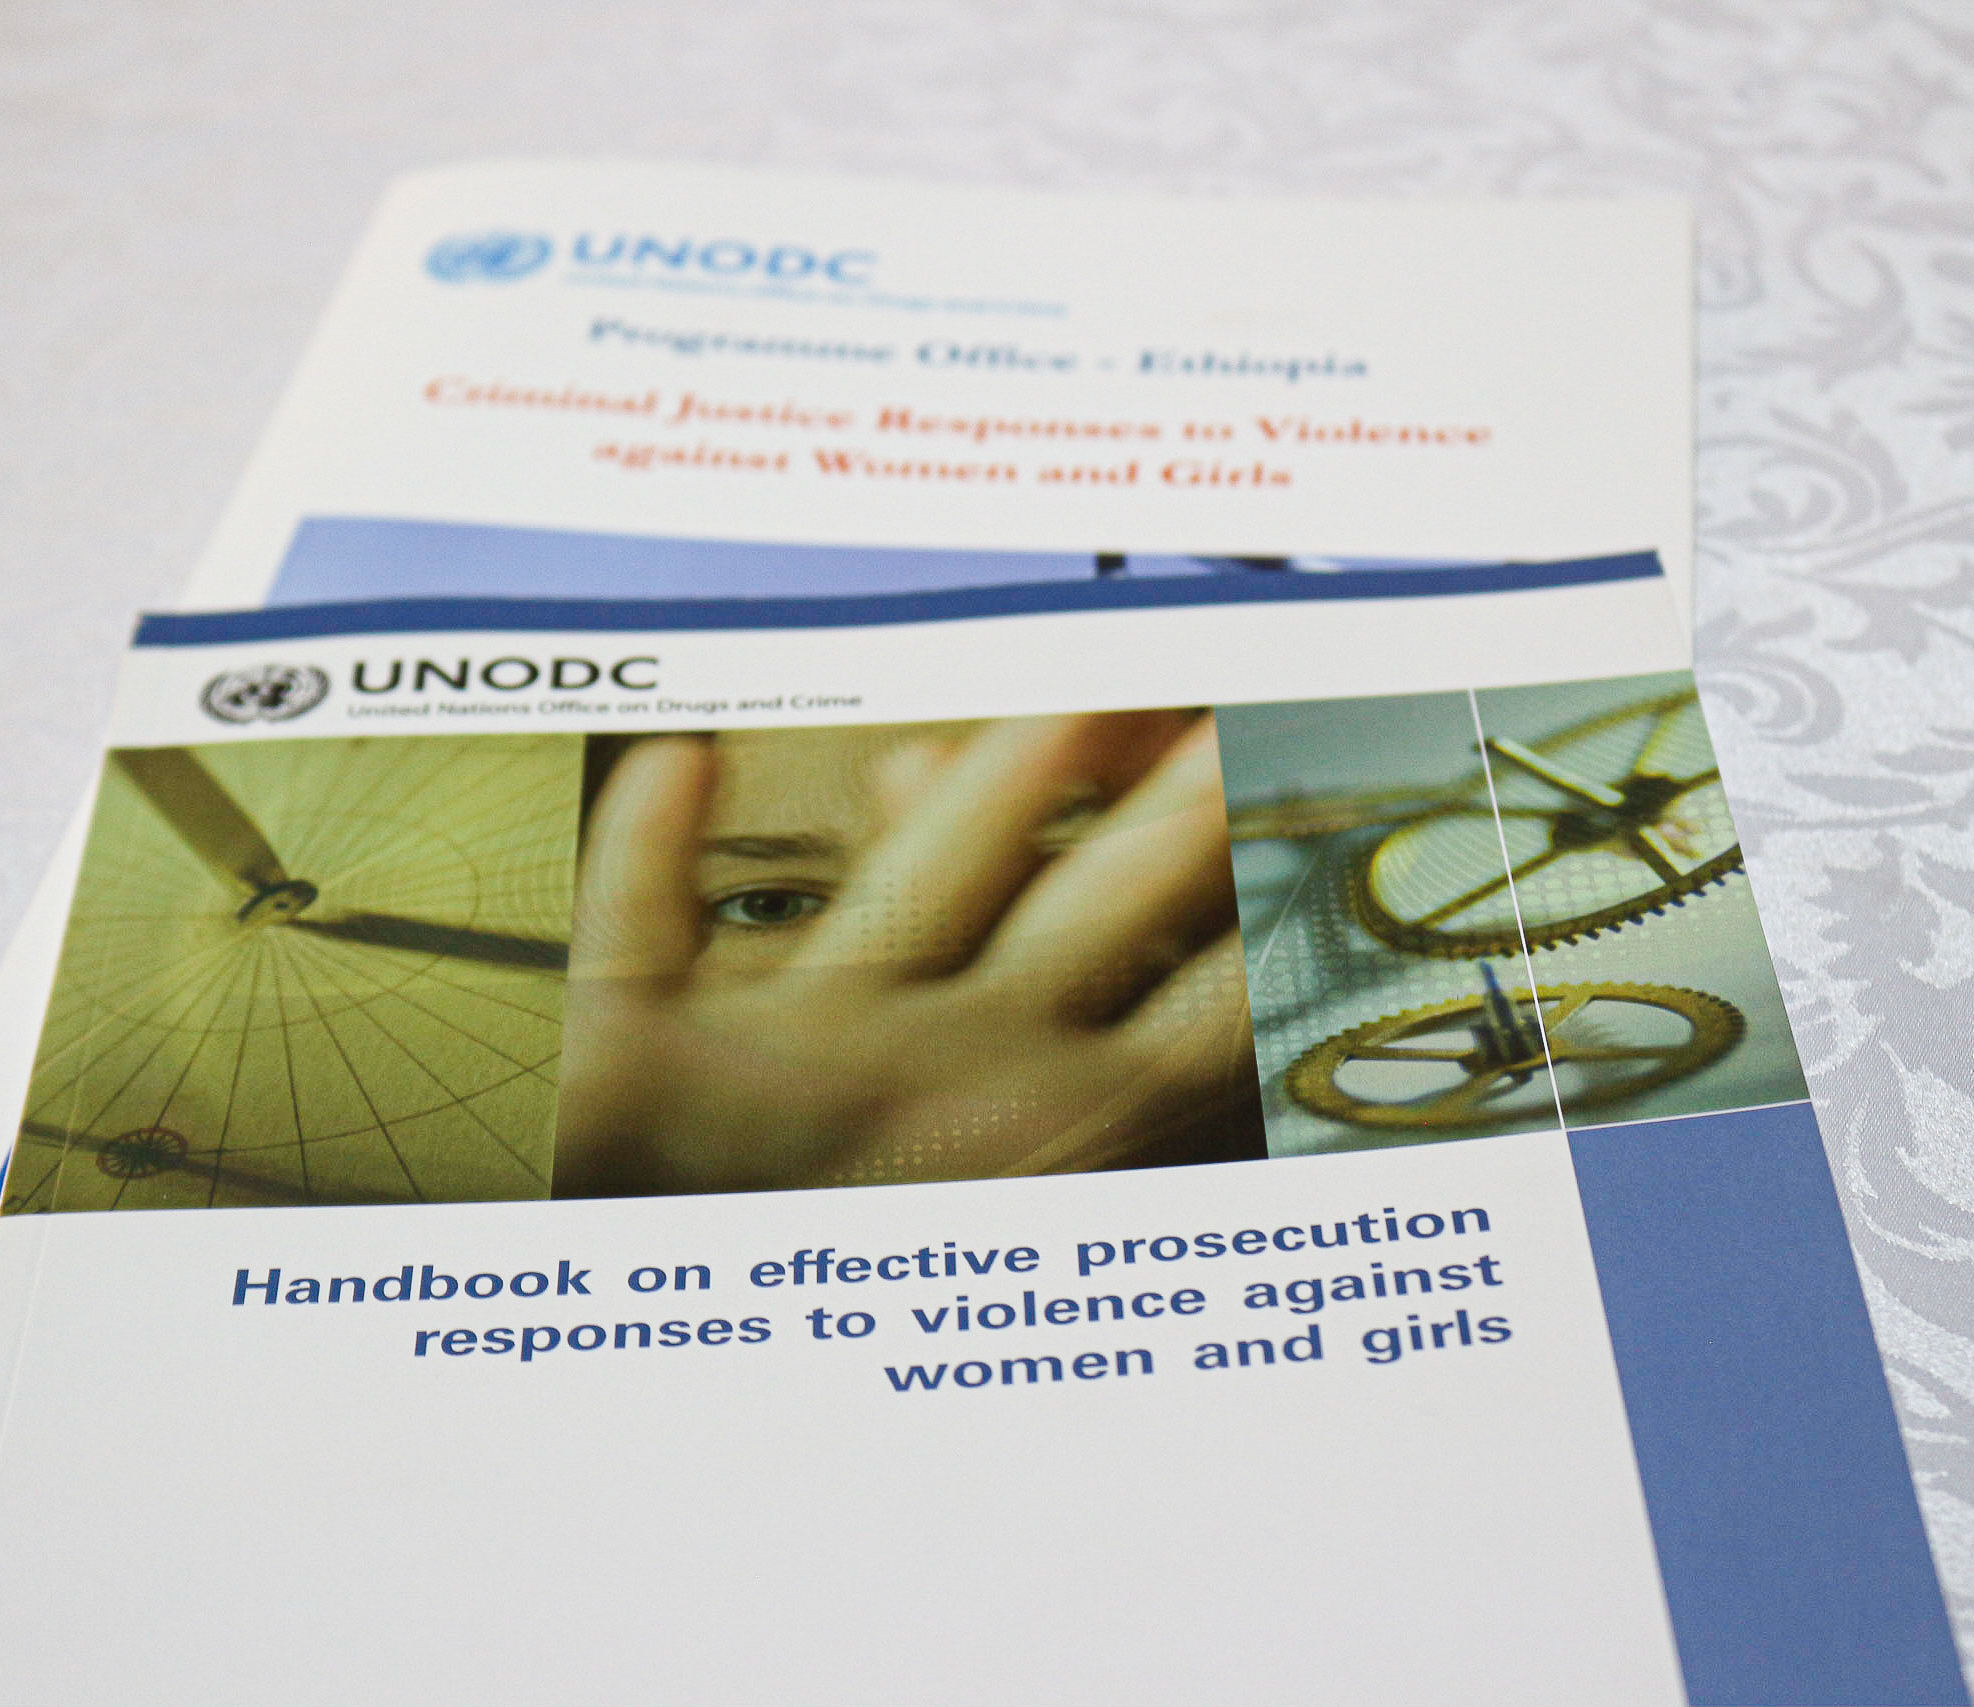 Handbook for prosecutors on approaches for VAWG